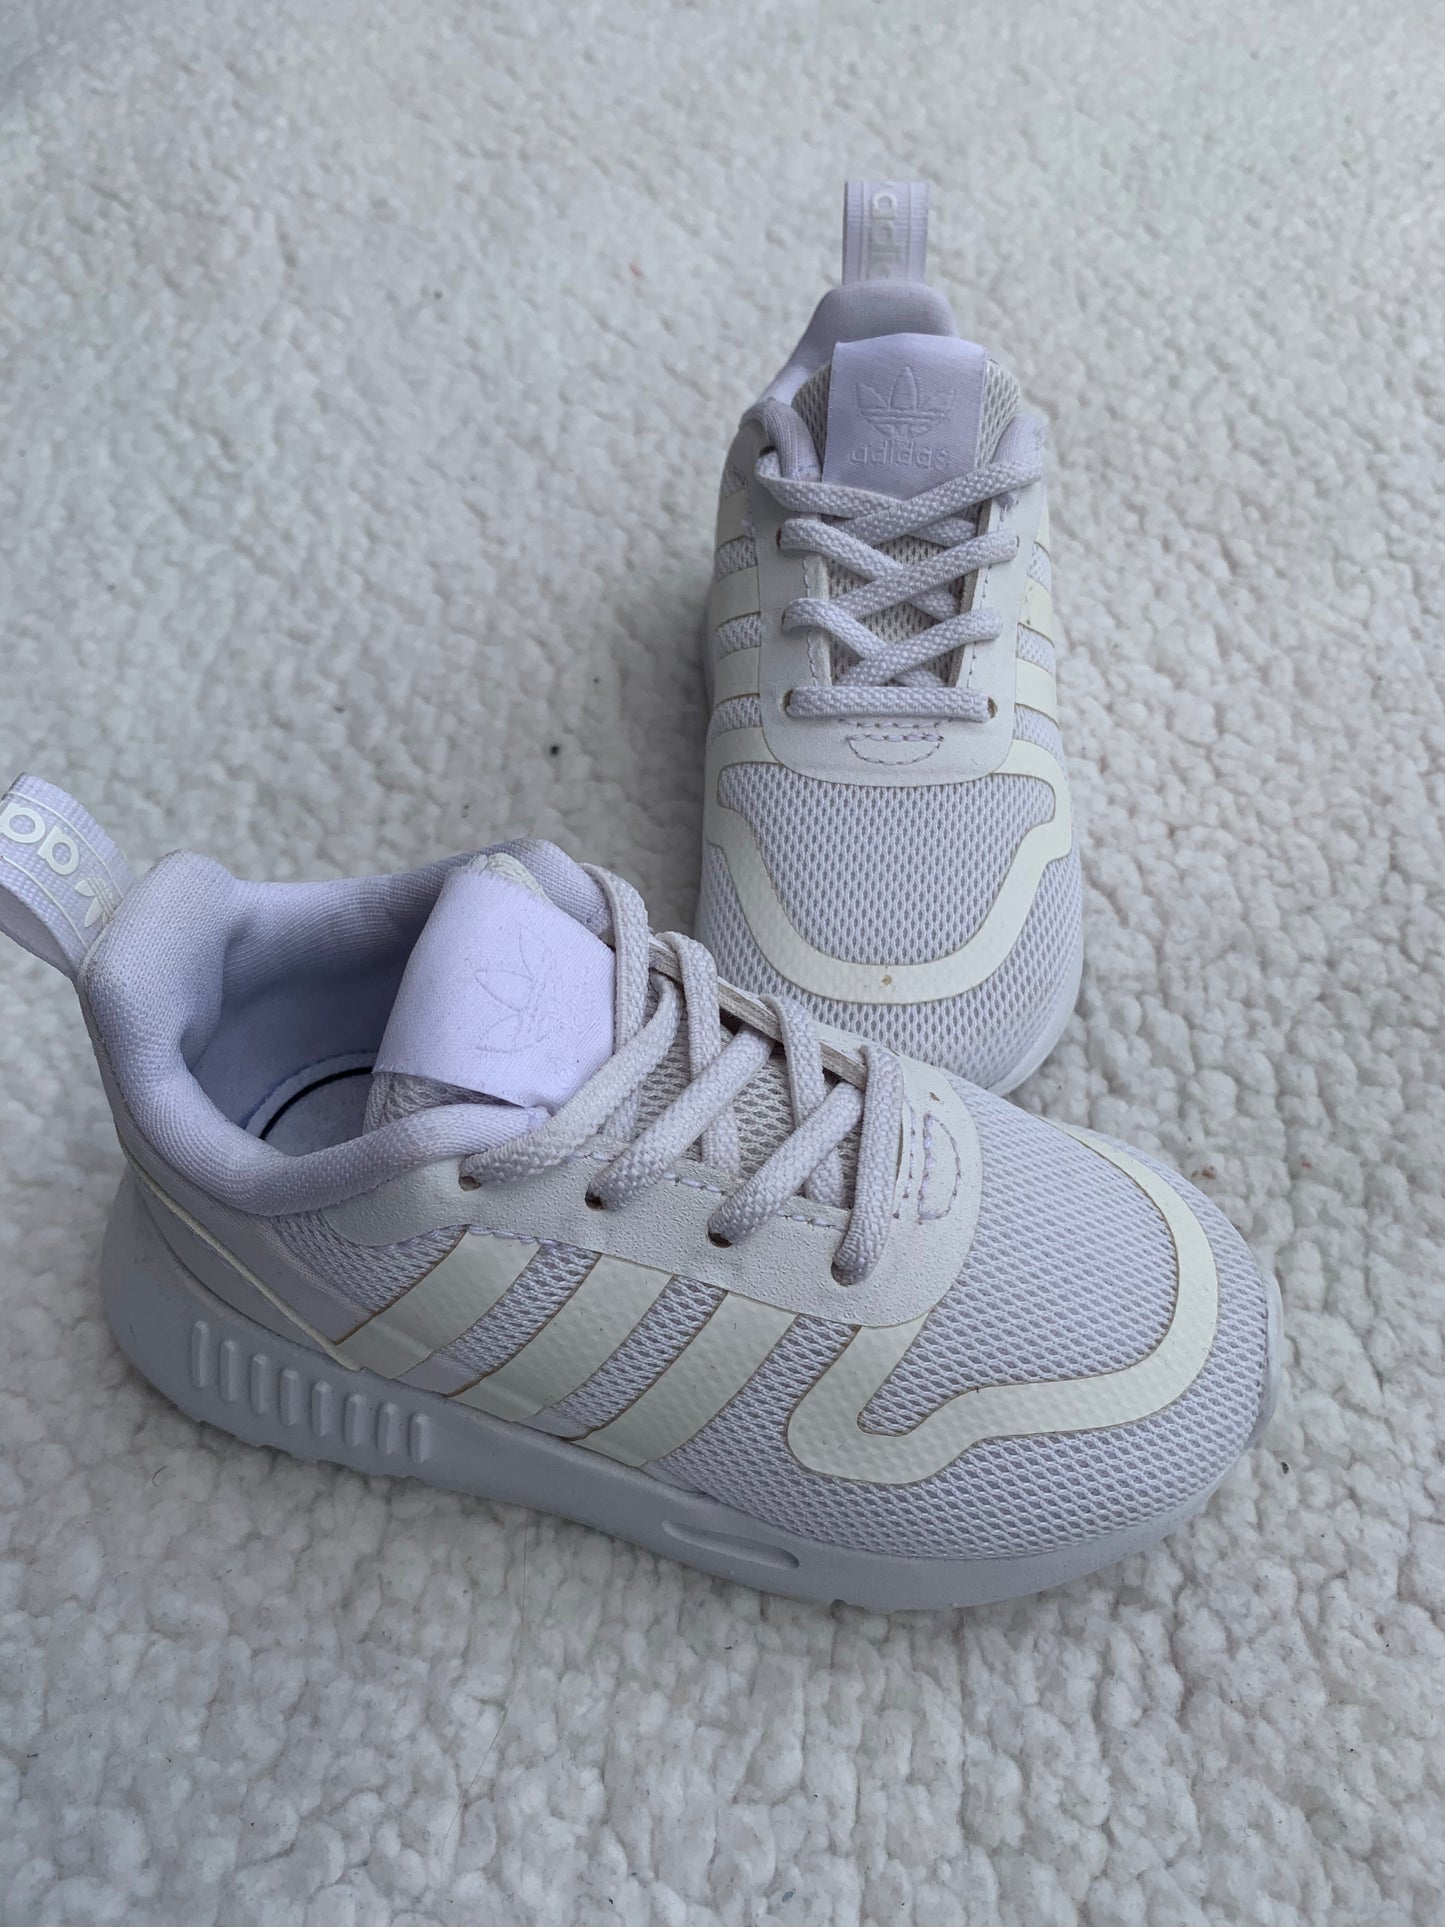 Adidas sneakers for kids